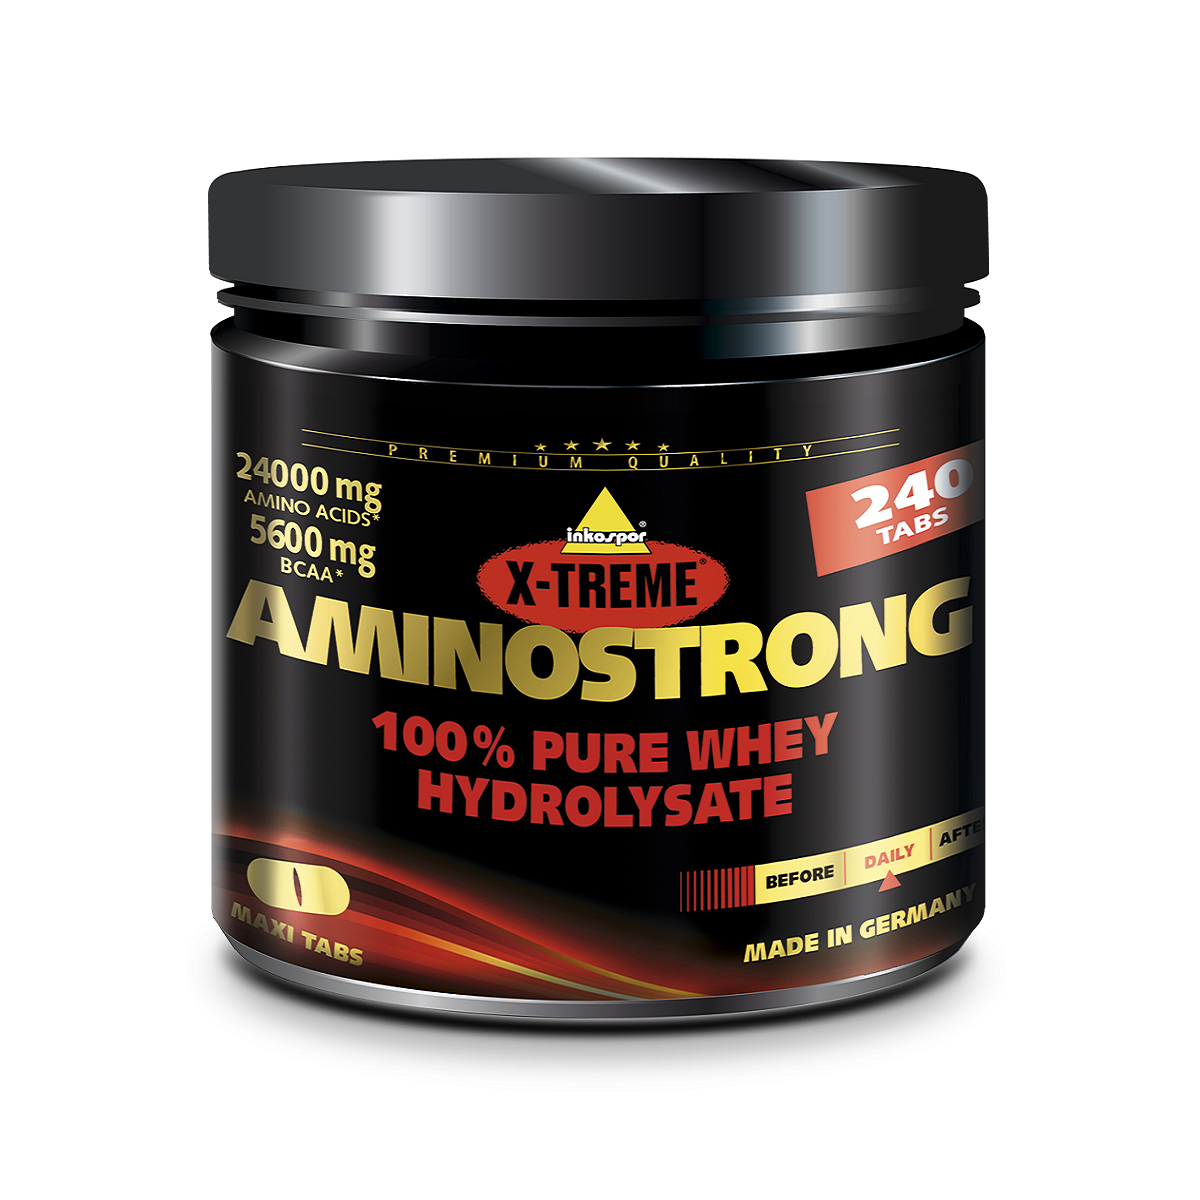 X-TREME AMINOSTRONG tabs